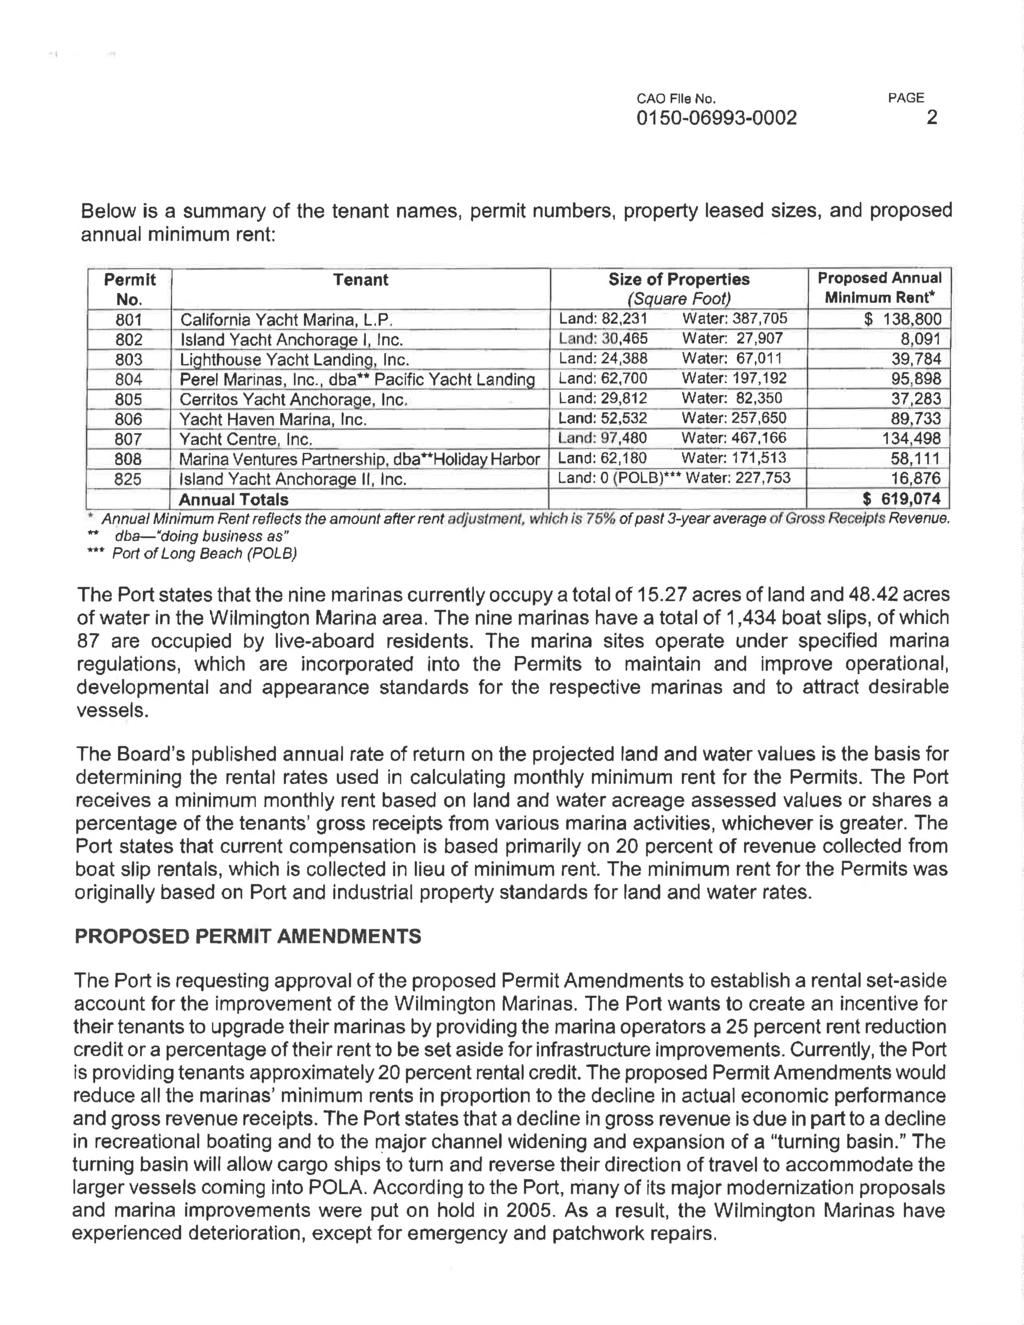 CAO File No. 0150 06993-0002 - PAGE 2 Below is a summary of the tenant names, permit numbers, property leased sizes, and proposed annual minimum rent: Permit No.